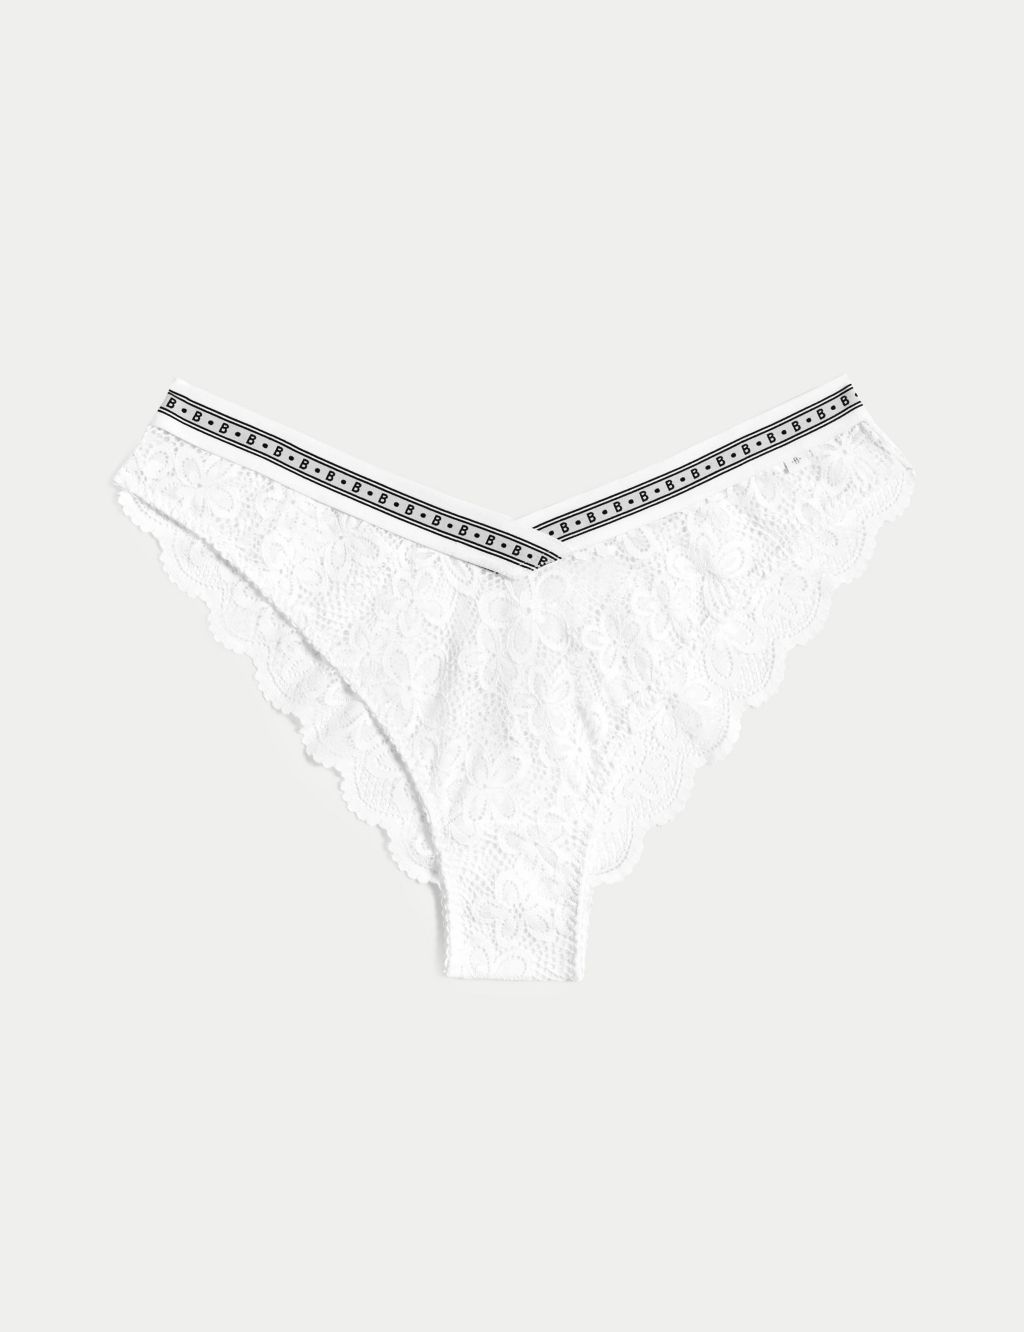 Cleo Lace Miami Knickers image 2